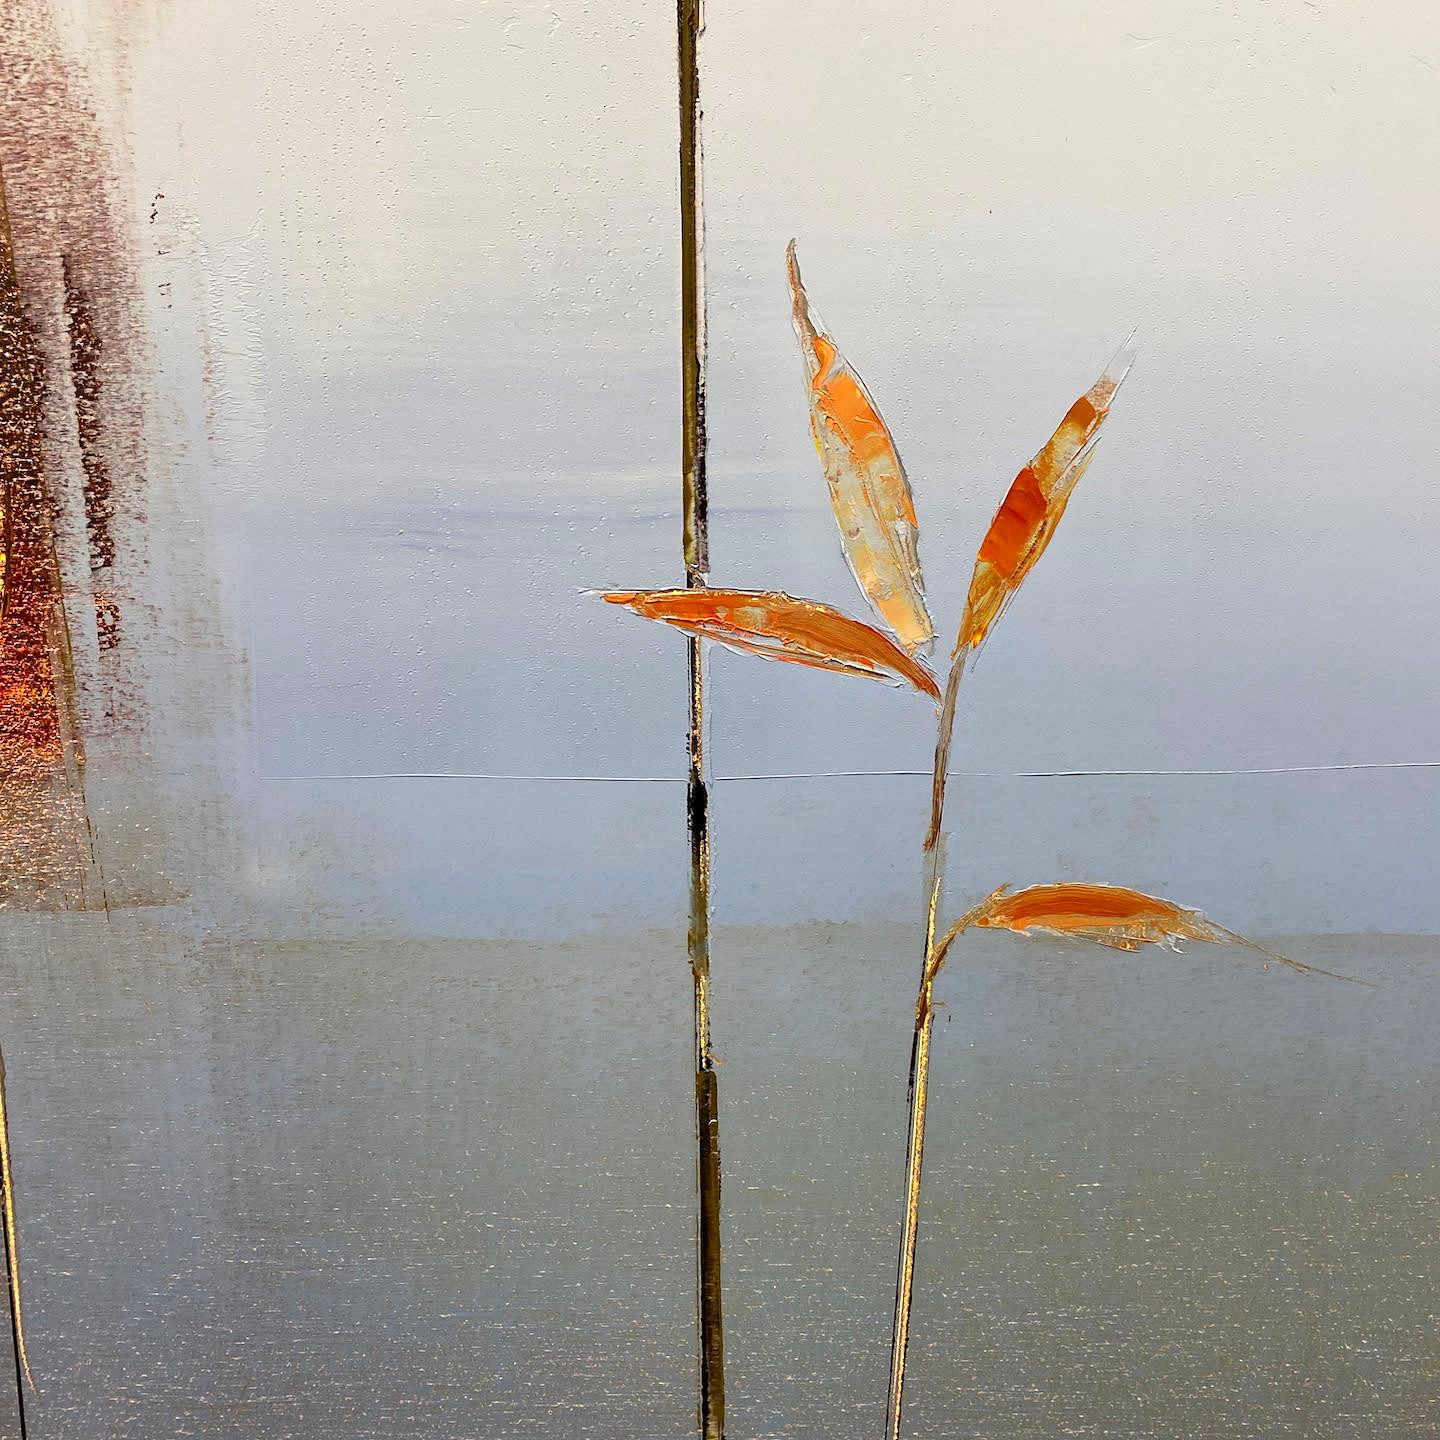 Stephen Pentak
2019, X.II, 2019
oil on panel
40 x 56 in.
(pent478)

This original oil painting on panel by Stephen Pentak depicts a serene and beautiful lake waterscape in shades of blue, orange, and brown.

Stephen Pentak’s paintings are based on